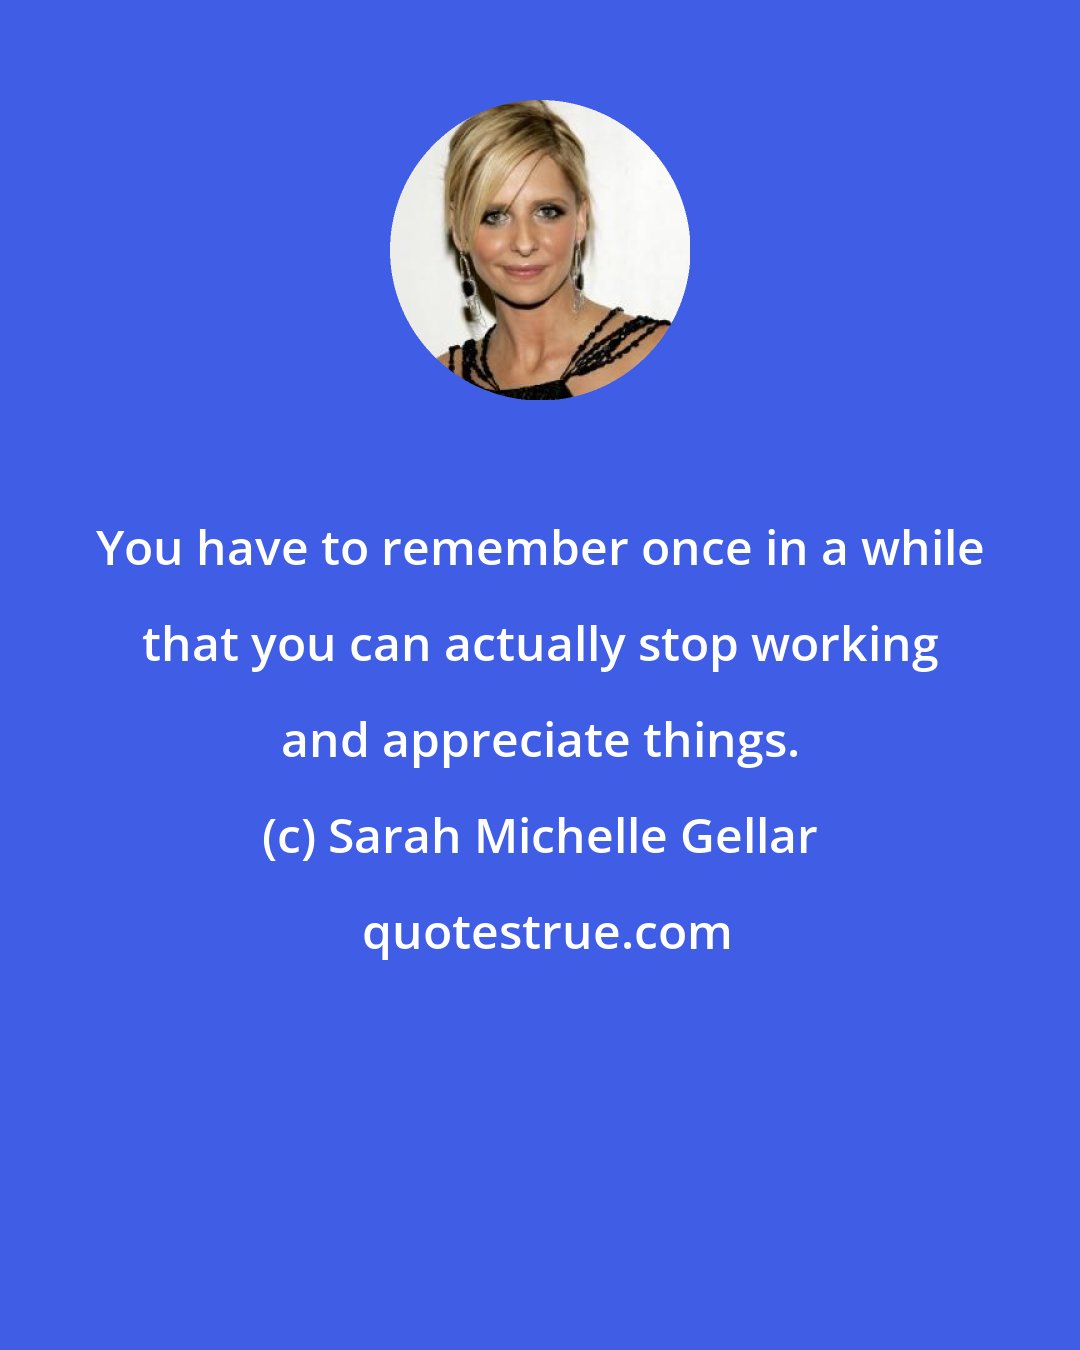 Sarah Michelle Gellar: You have to remember once in a while that you can actually stop working and appreciate things.